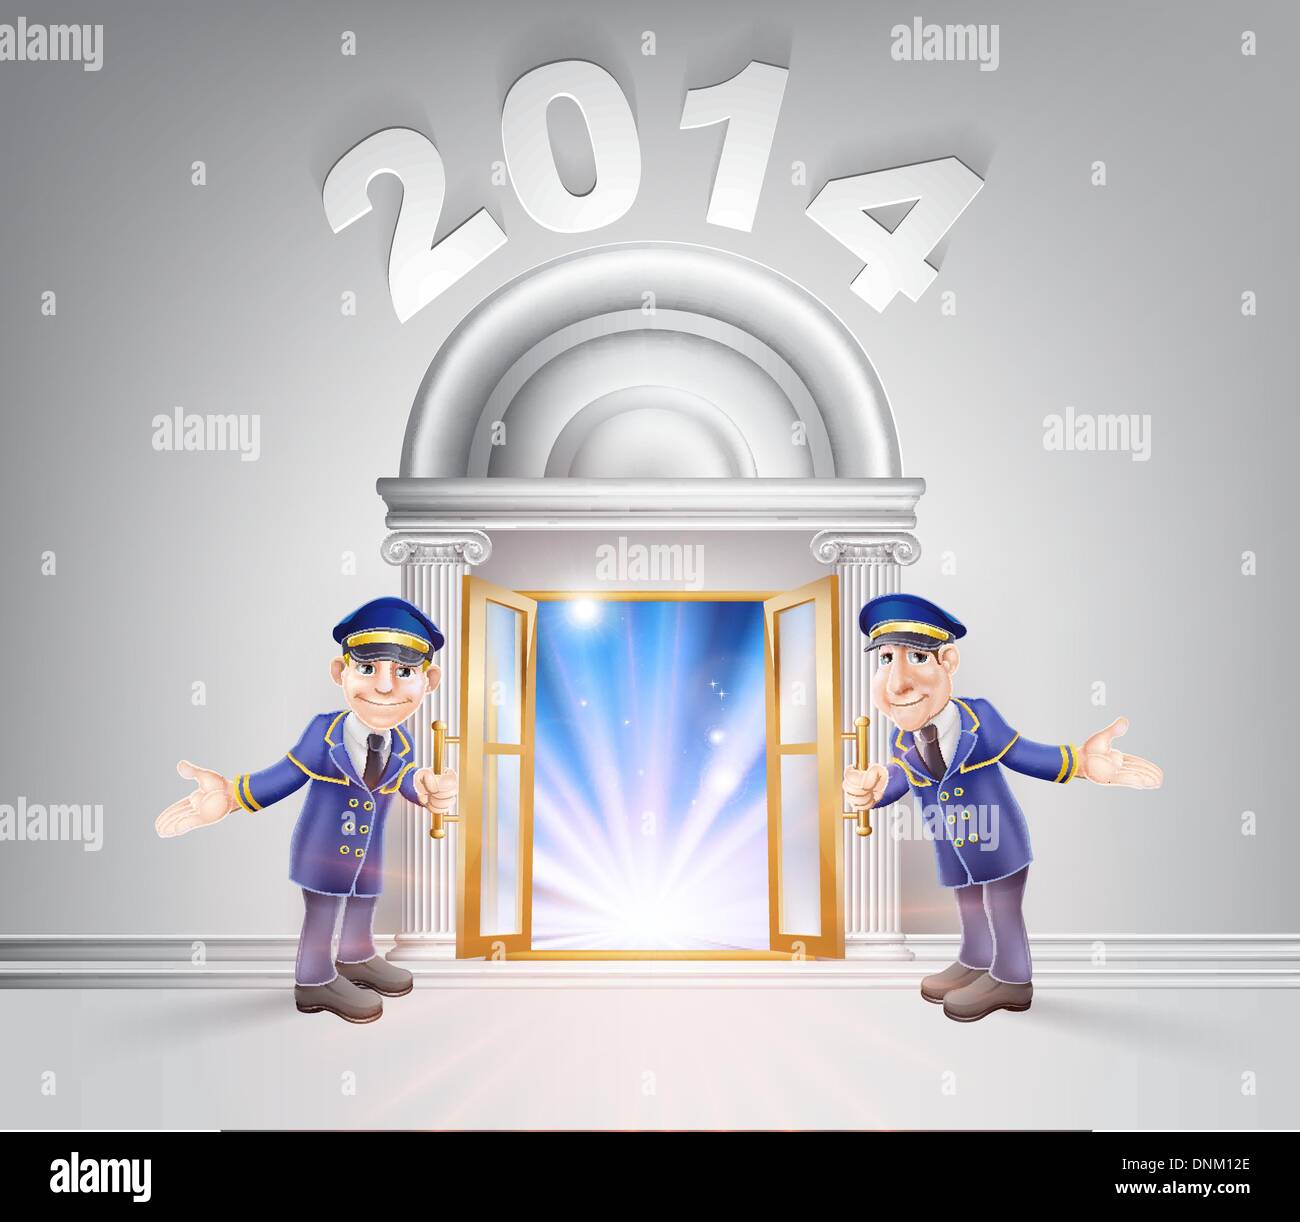 New Year Door 2014 concept of a doormen hoding open a door to the new year with light streaming through it. Stock Vector